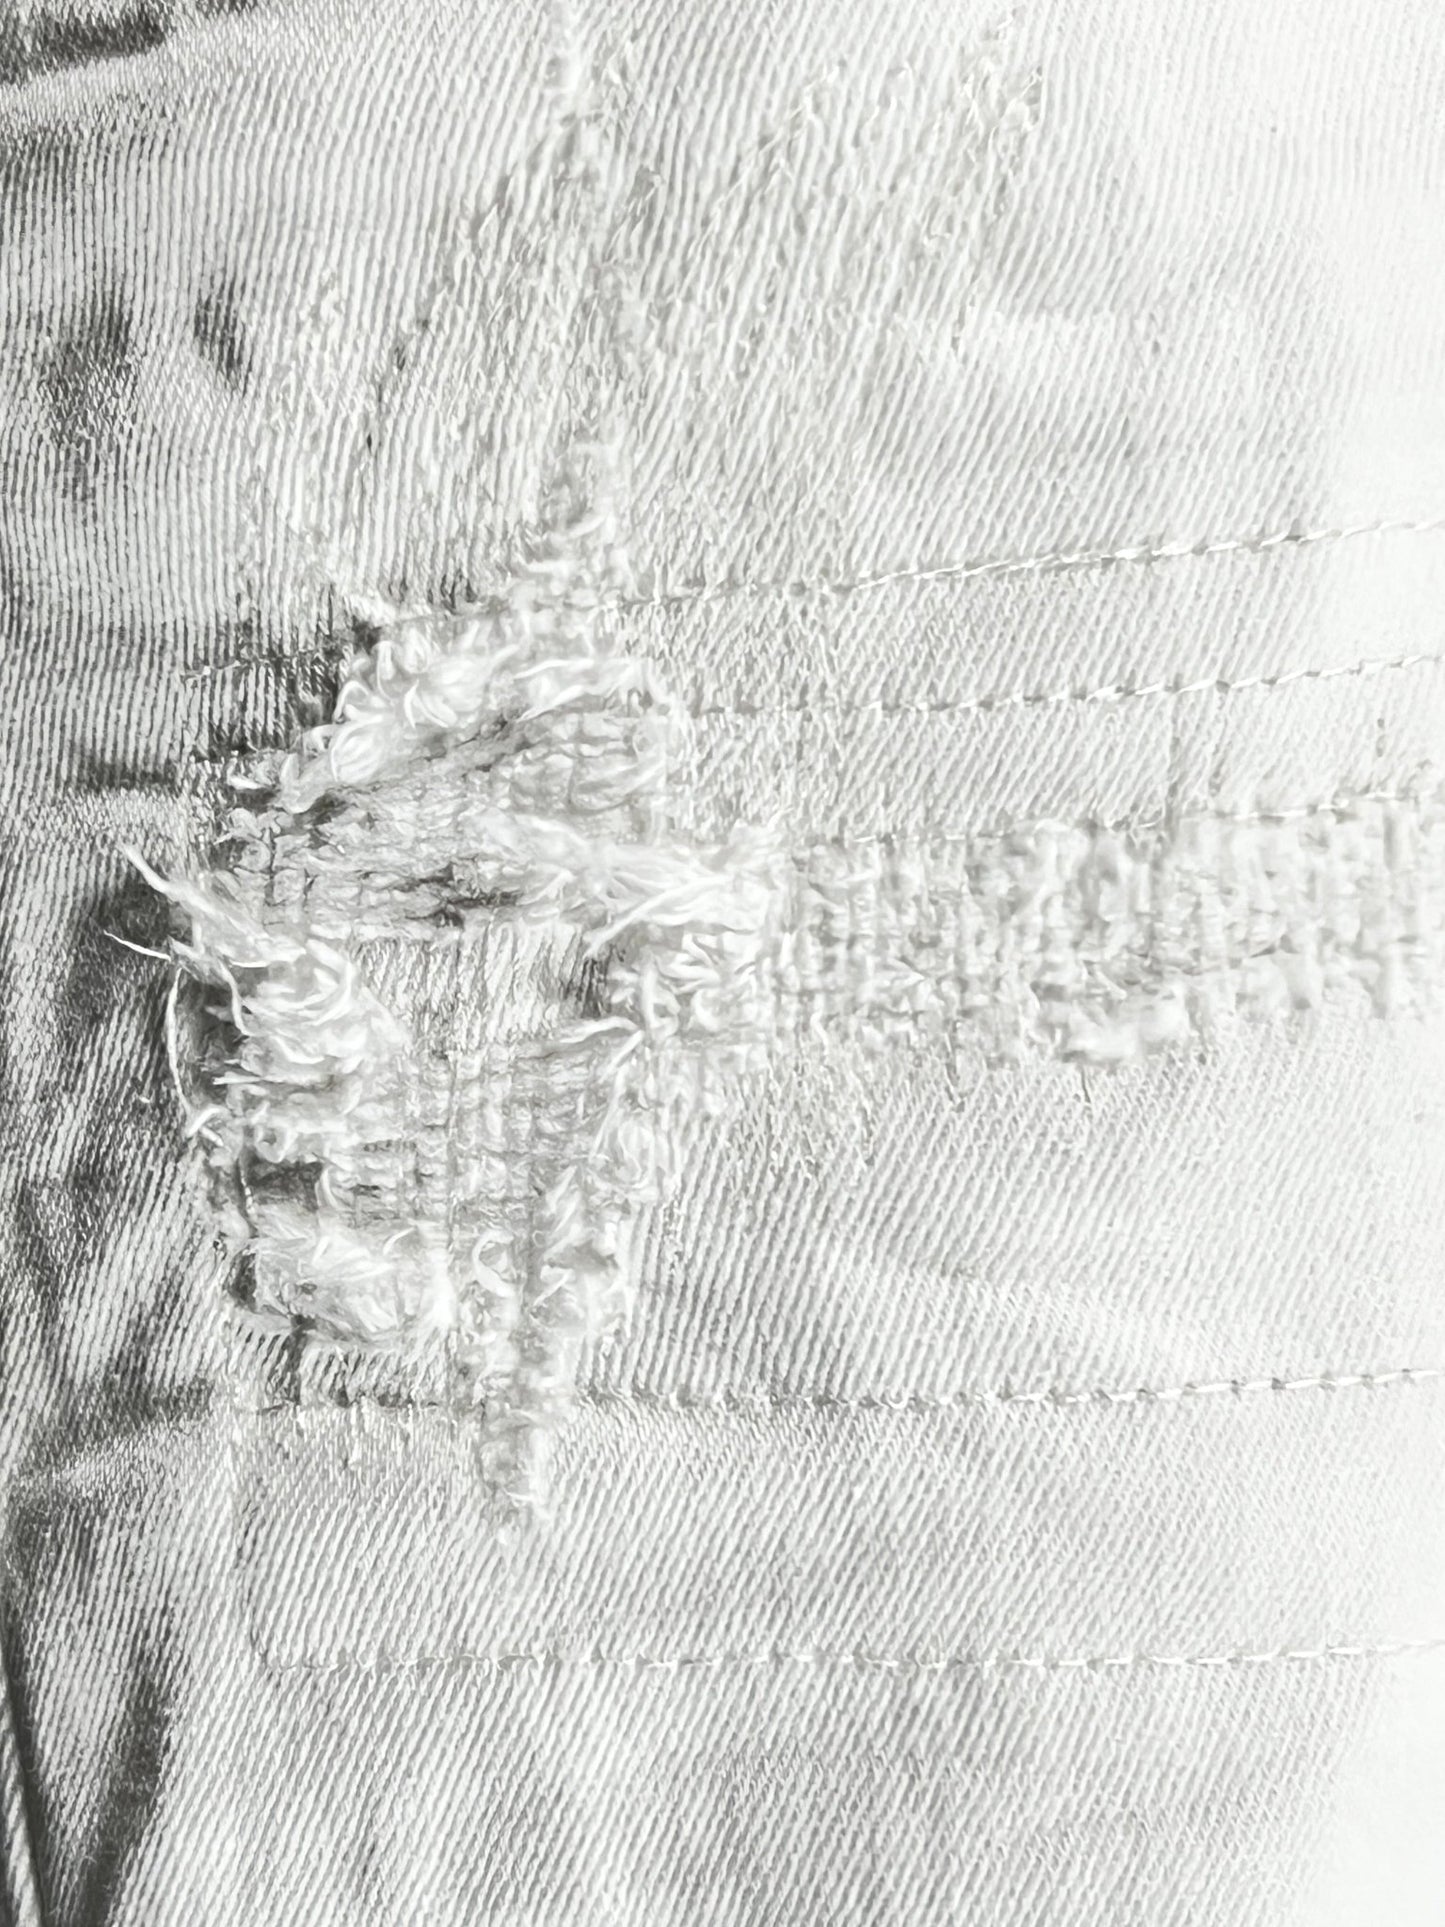 Close-up of a trendy PURPLE BRAND P001-LDWH LIGHT DESTROY WHITE denim fabric with frayed threads and visible stitching details.